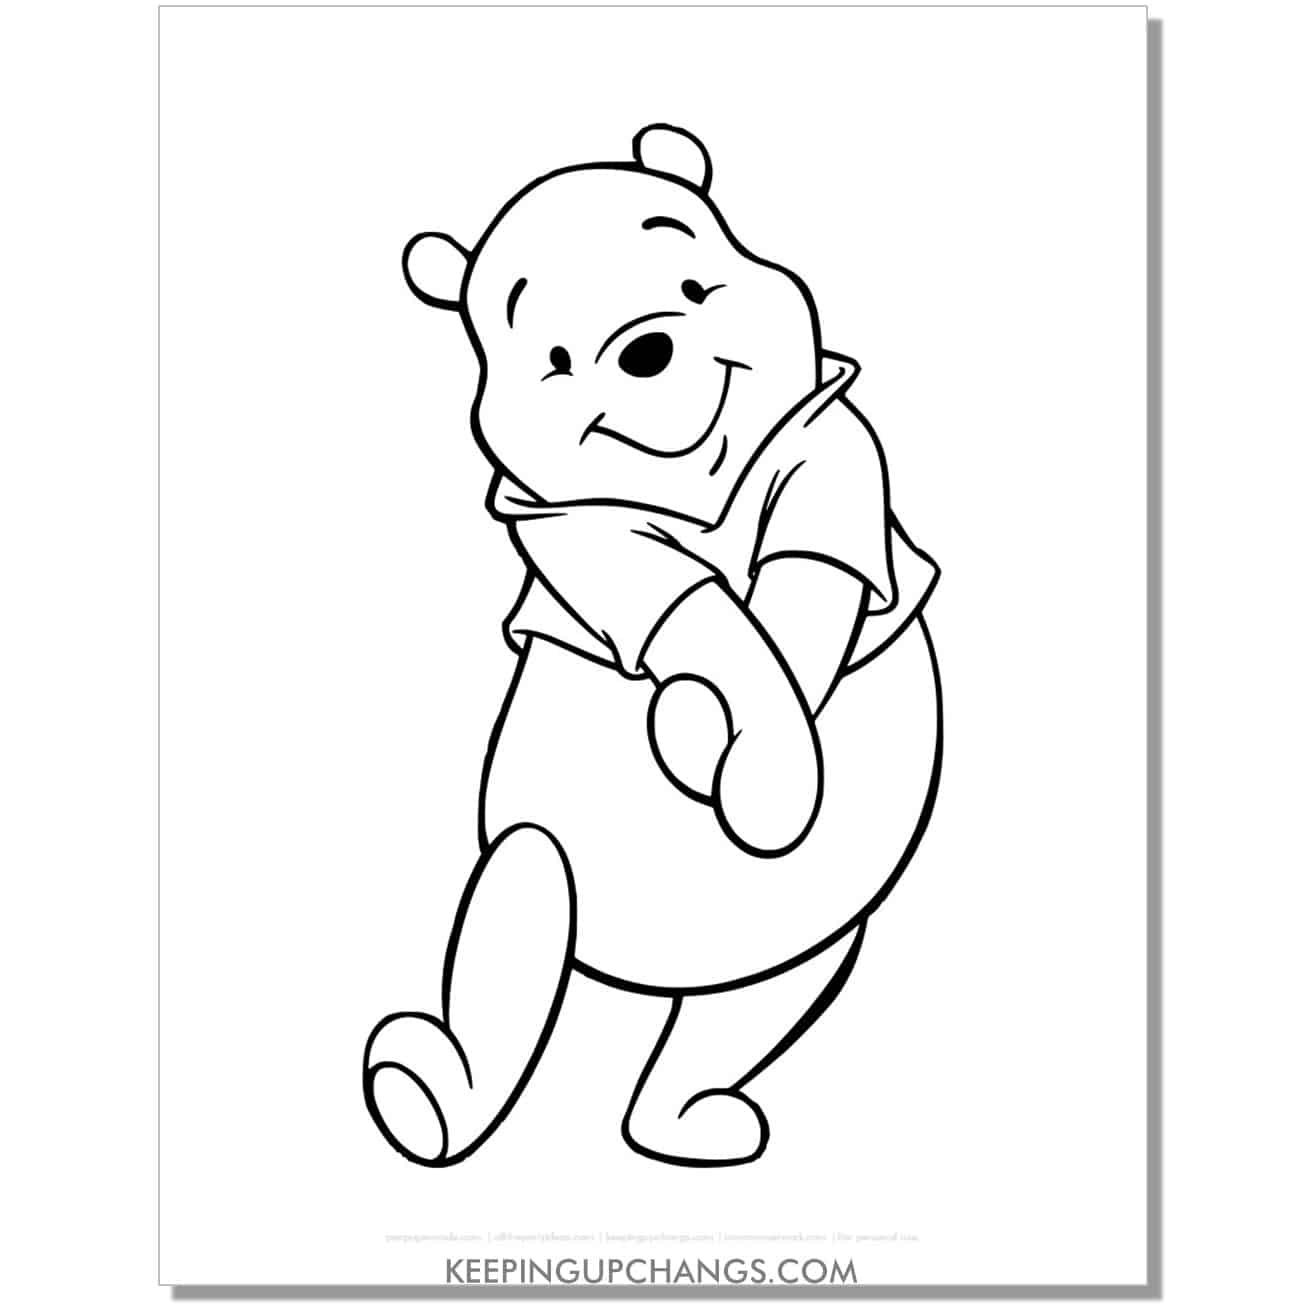 winnie the pooh arms together coloring page, sheet.